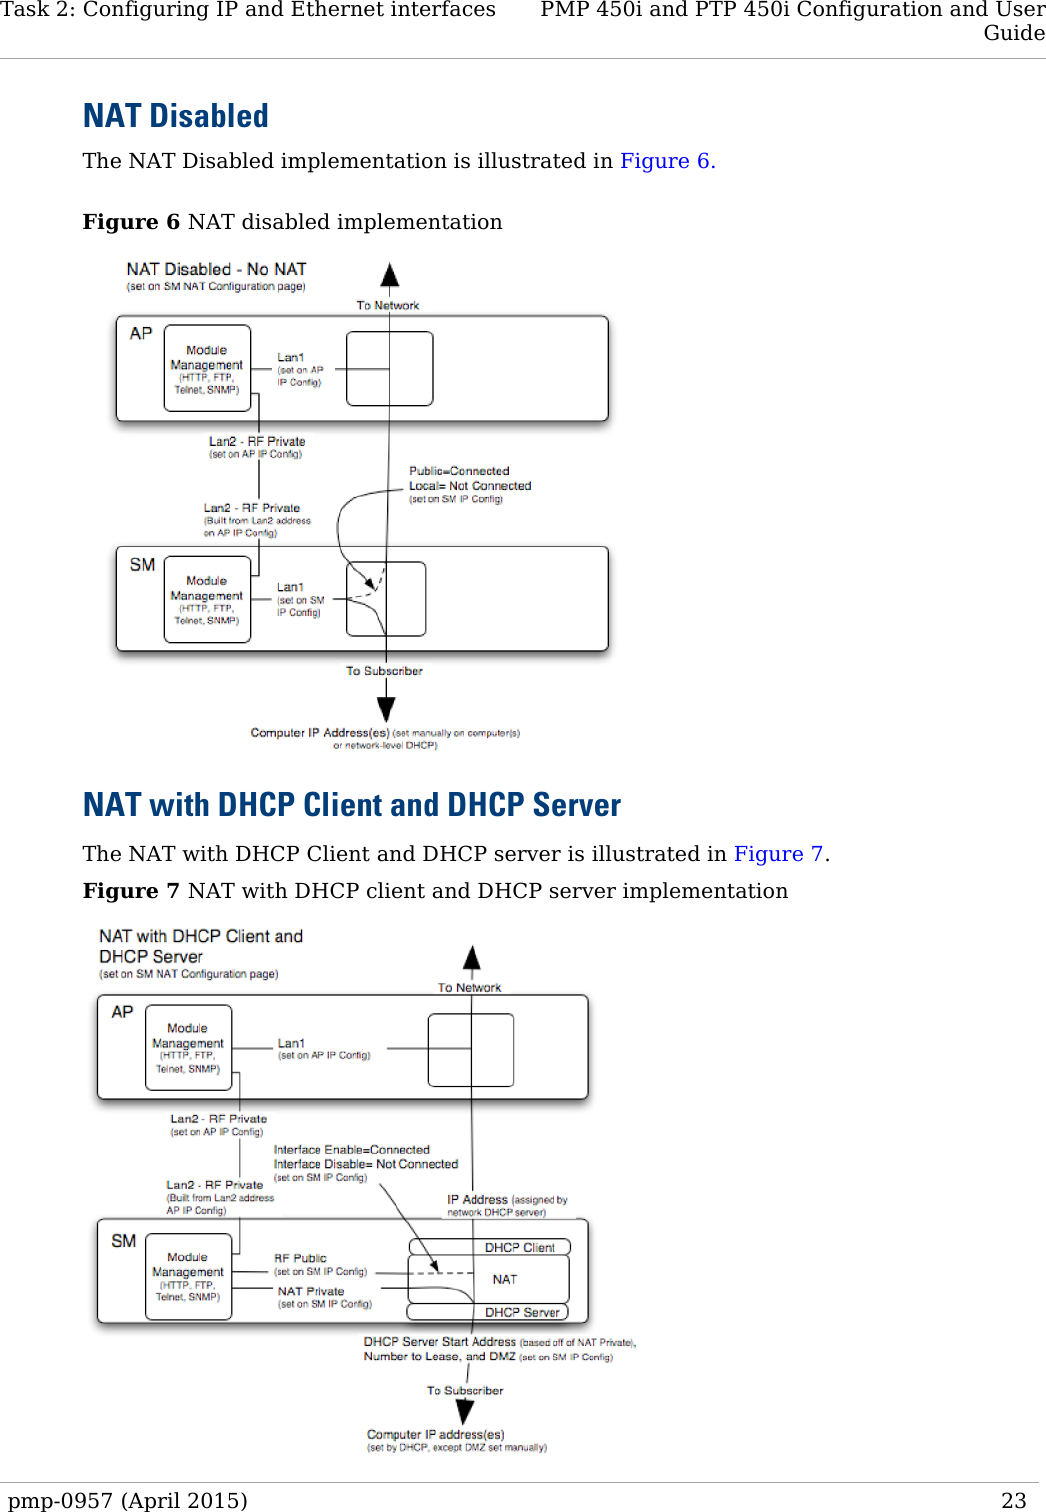 Task 2: Configuring IP and Ethernet interfaces PMP 450i and PTP 450i Configuration and User Guide  NAT Disabled The NAT Disabled implementation is illustrated in Figure 6.  Figure 6 NAT disabled implementation  NAT with DHCP Client and DHCP Server The NAT with DHCP Client and DHCP server is illustrated in Figure 7. Figure 7 NAT with DHCP client and DHCP server implementation  pmp-0957 (April 2015)   23  